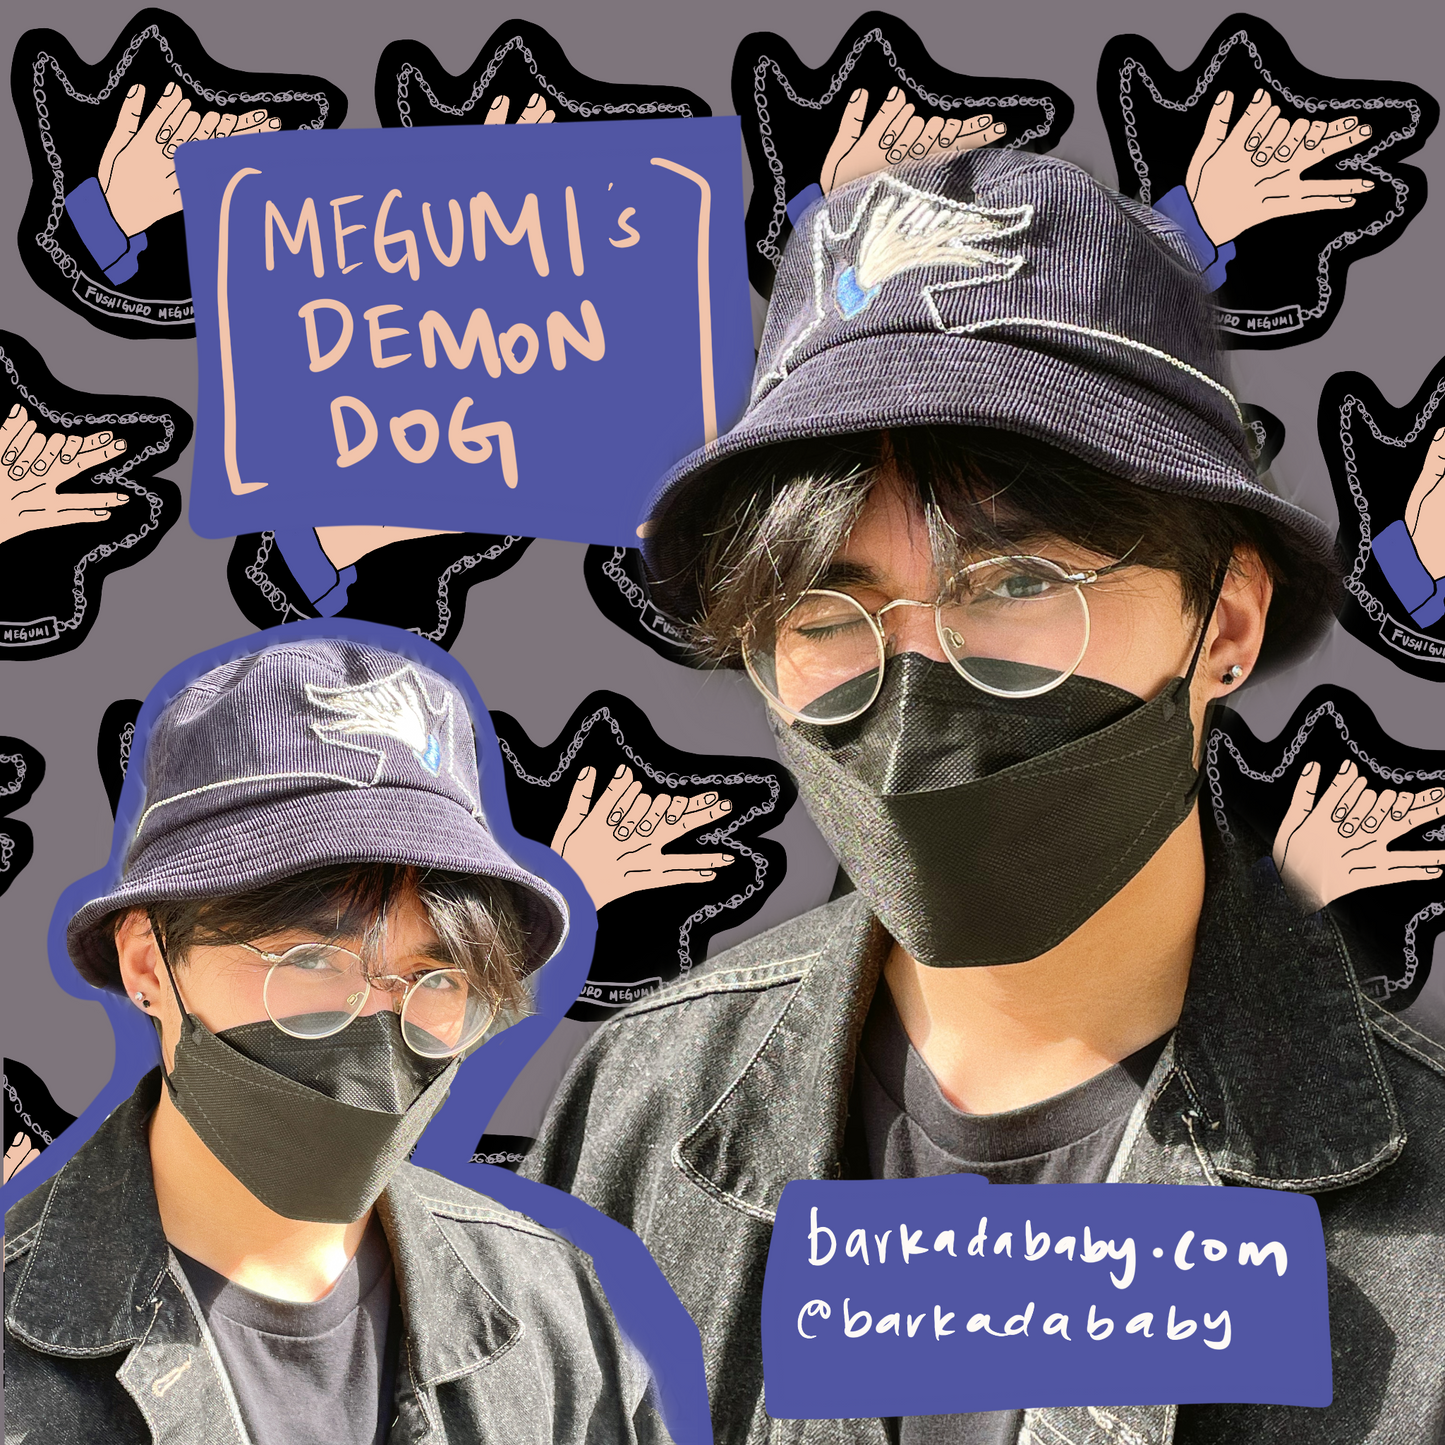 gray background with megumi demon dog sticker repeated in the background. blue text boxes read “[megumis demon dog]. barkadababy.com @barkadababy “ there is a collage of two photos of a masked person with glasses wearing a black corduroy bucket hat with a dog shaped silver chain.